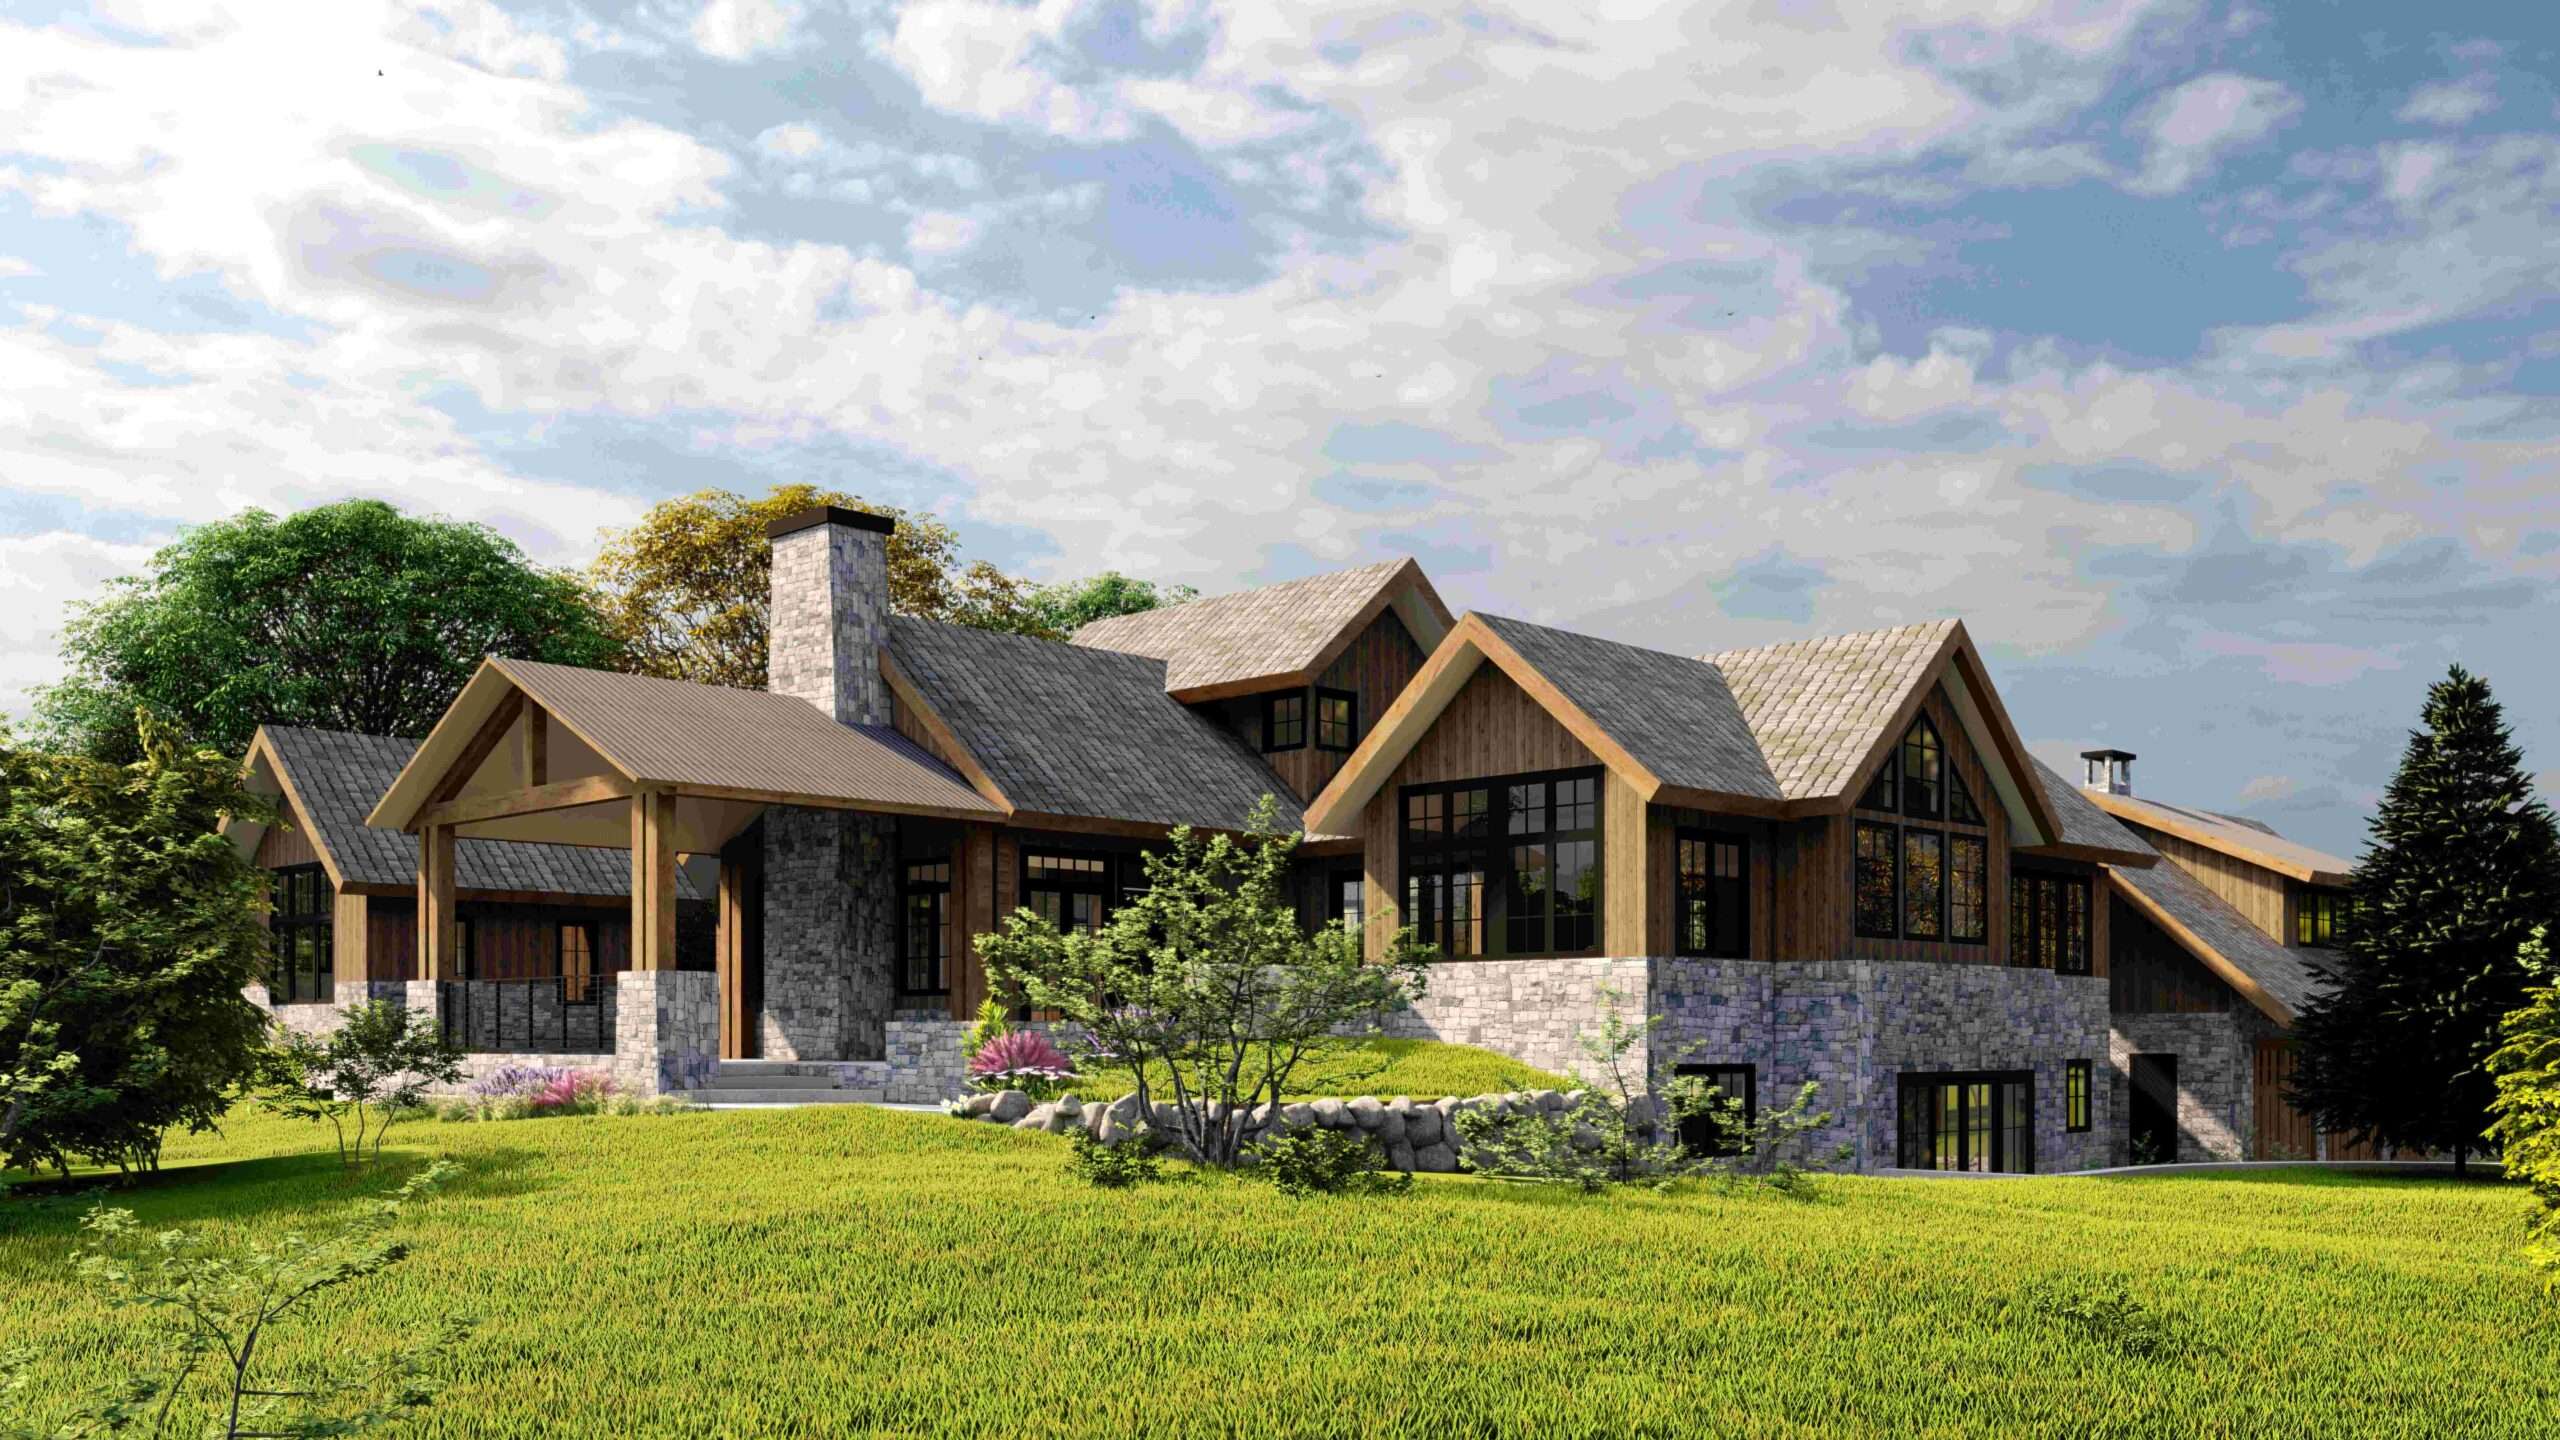 An elegant mountain lodge with stone and wood exteriors, large windows, and a spacious layout. Nestled in a scenic mountain landscape, this retreat offers a perfect getaway. Design by Debora, an online interior design service.